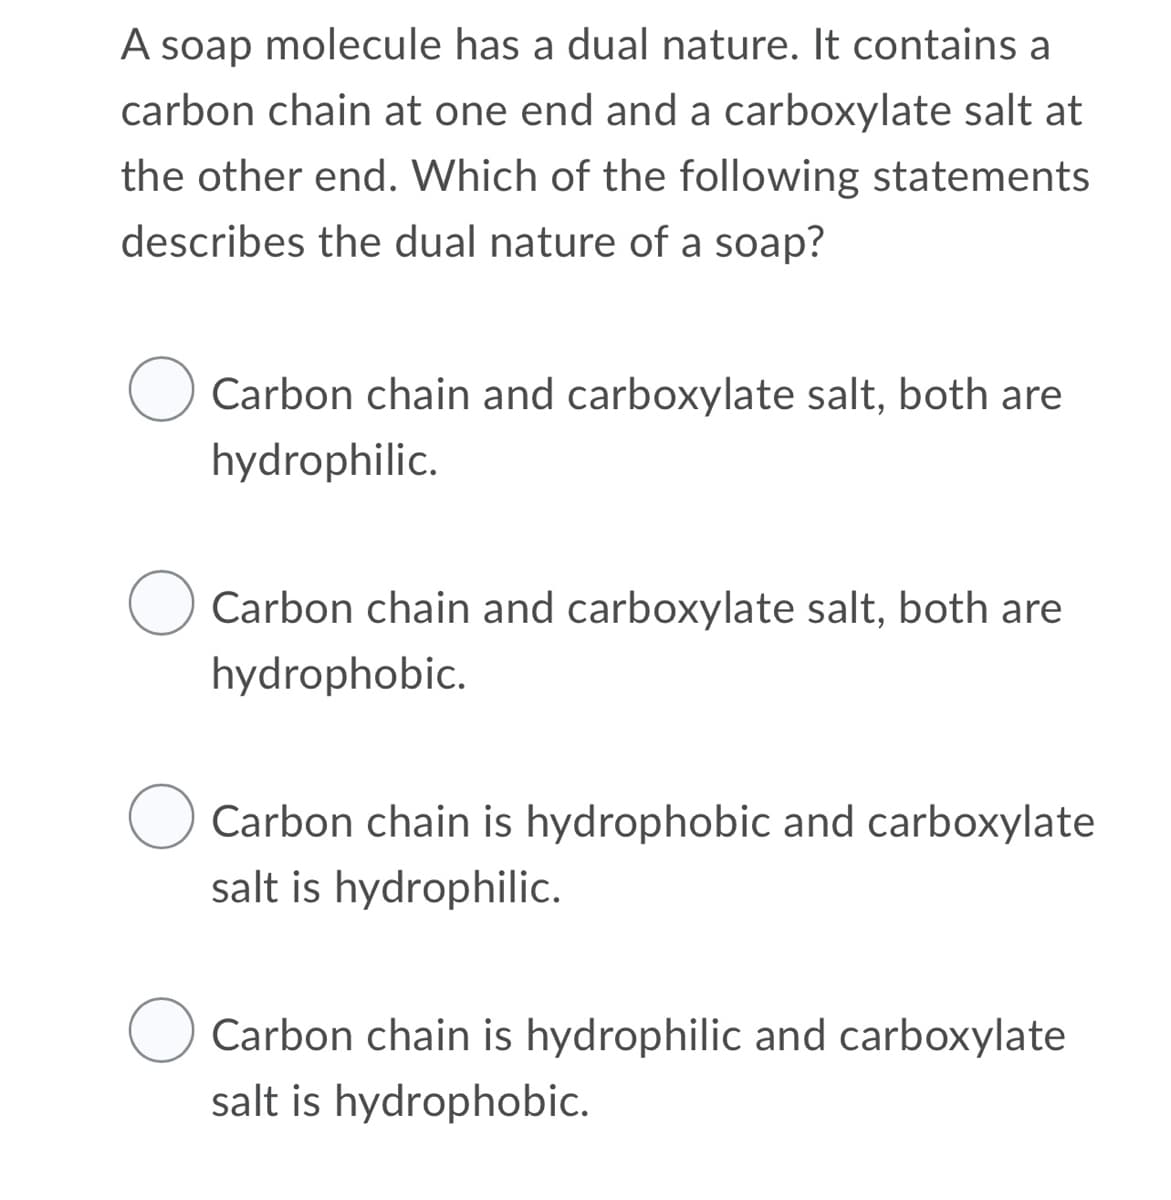 A soap molecule has a dual nature. It contains a
carbon chain at one end and a carboxylate salt at
the other end. Which of the following statements
describes the dual nature of a soap?
Carbon chain and carboxylate salt, both are
hydrophilic.
Carbon chain and carboxylate salt, both are
hydrophobic.
Carbon chain is hydrophobic and carboxylate
salt is hydrophilic.
Carbon chain is hydrophilic and carboxylate
salt is hydrophobic.
